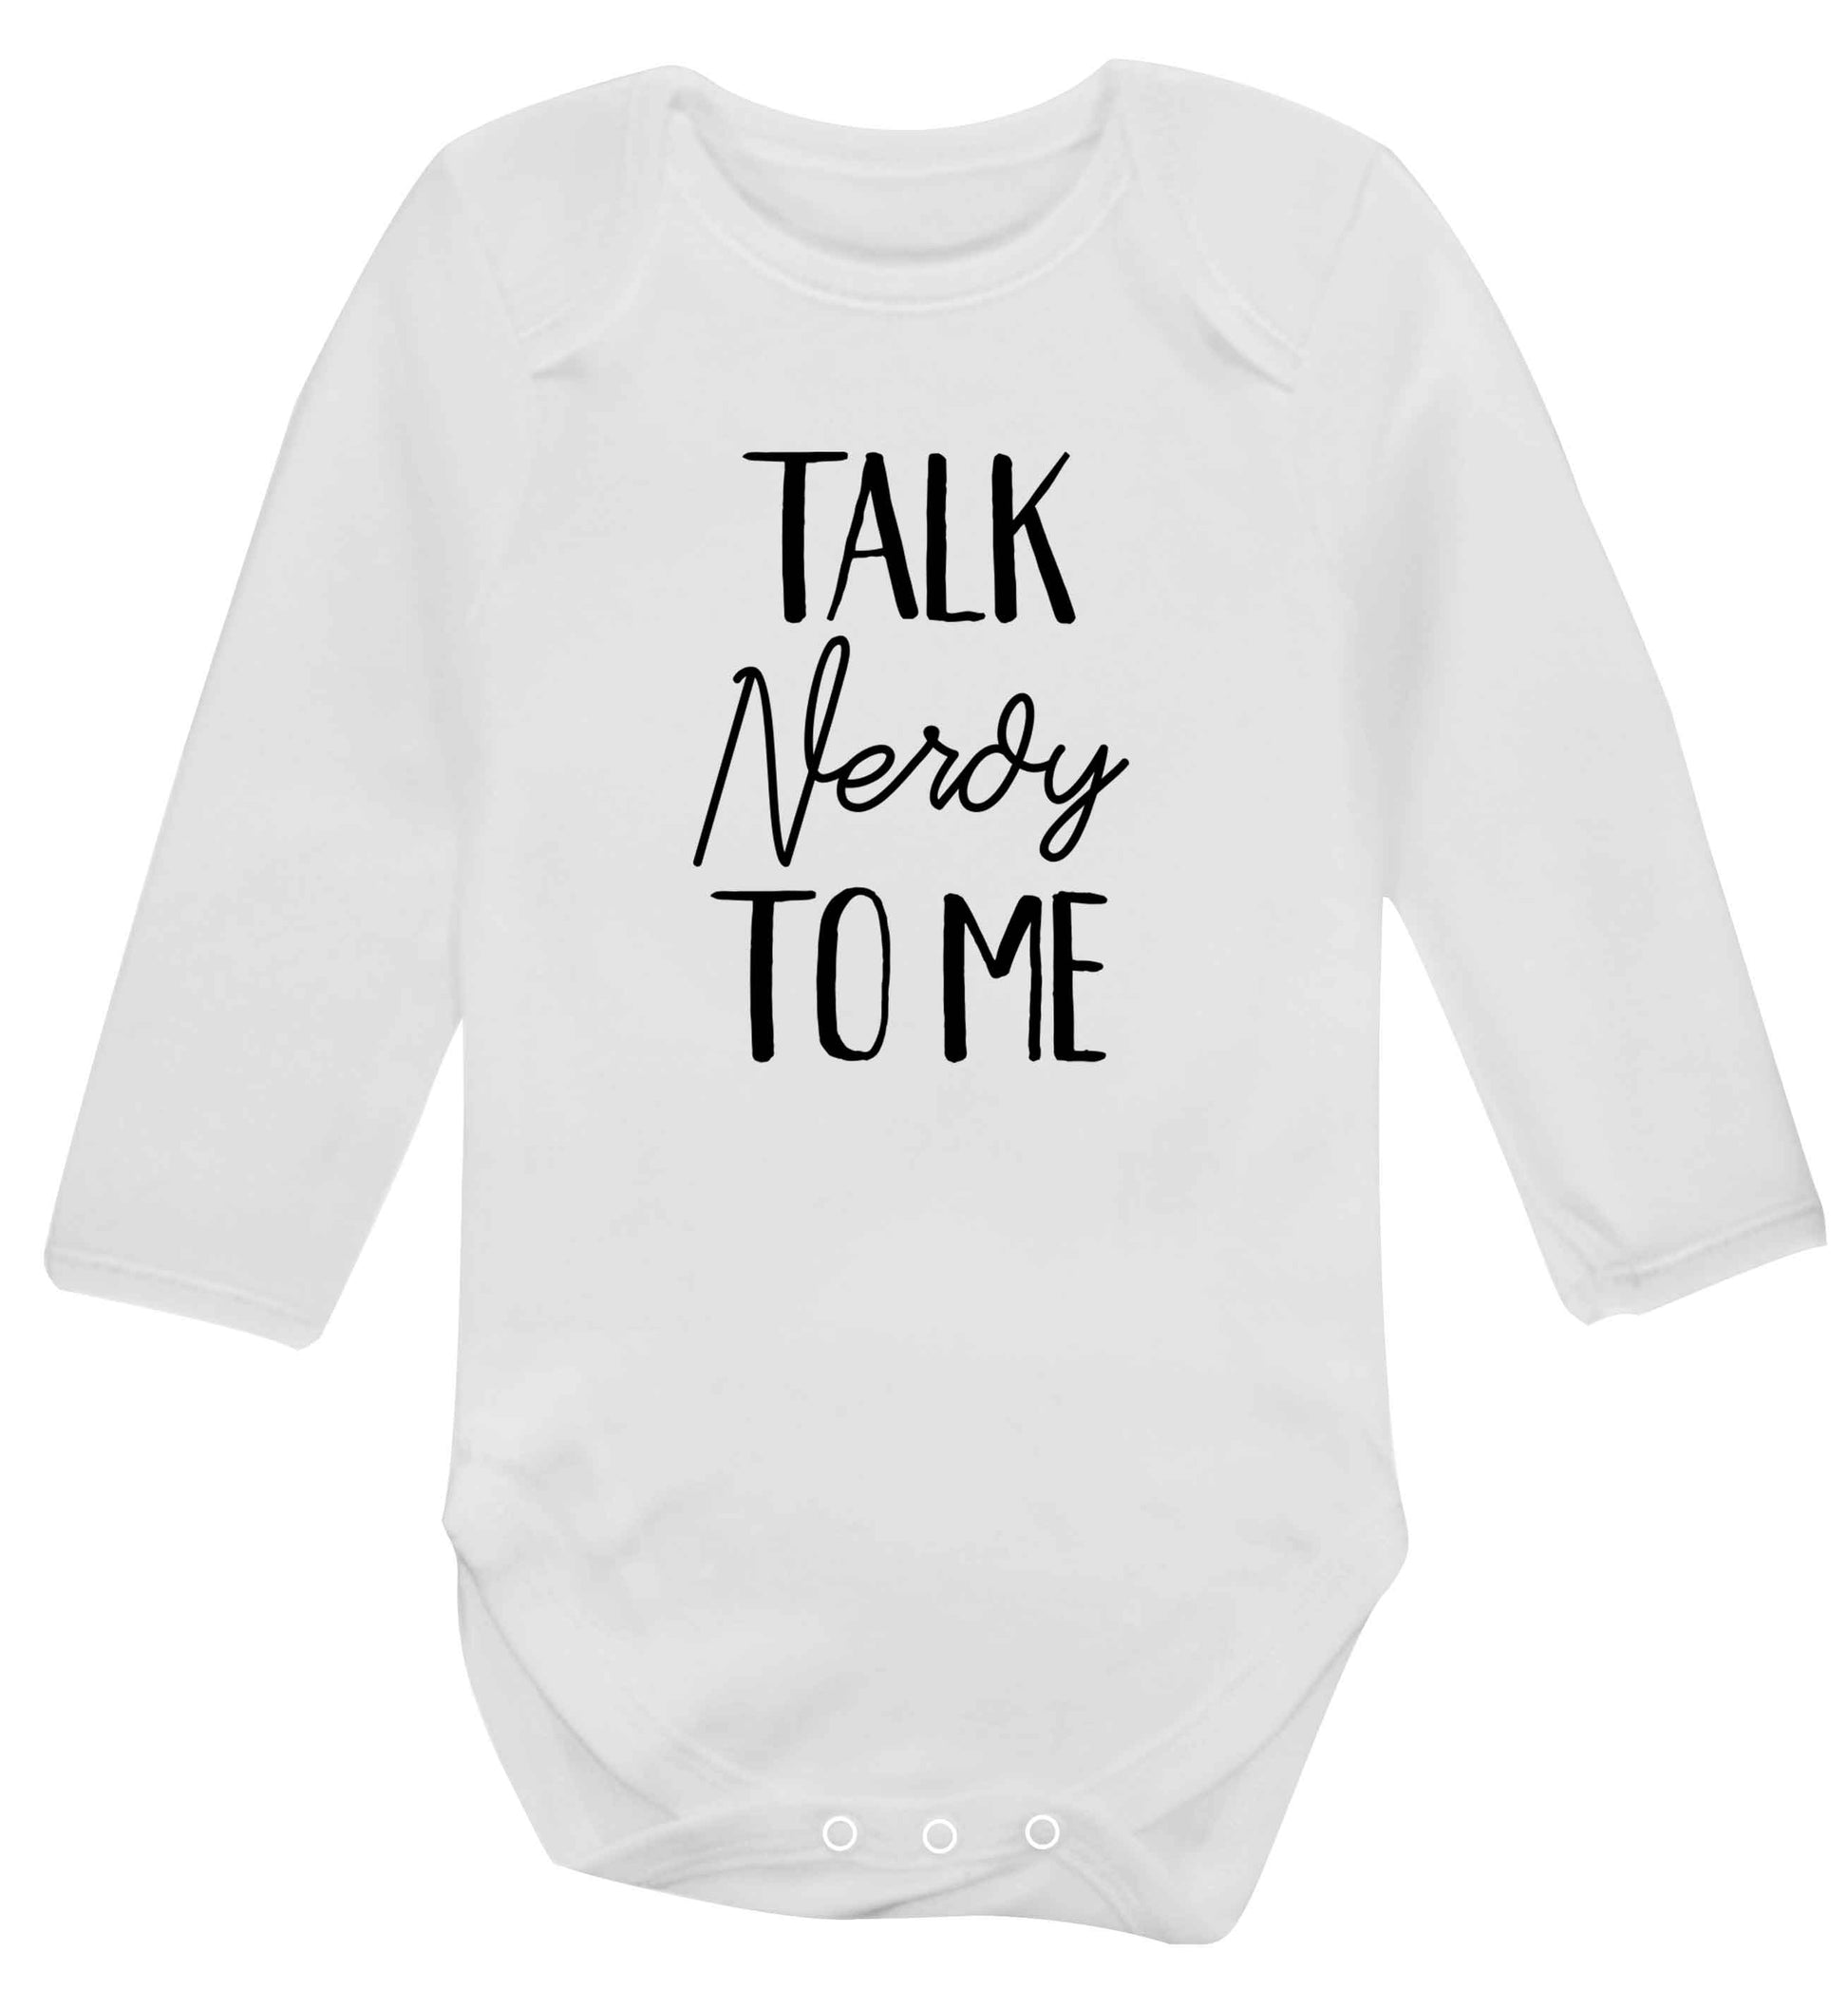 Talk nerdy to me baby vest long sleeved white 6-12 months